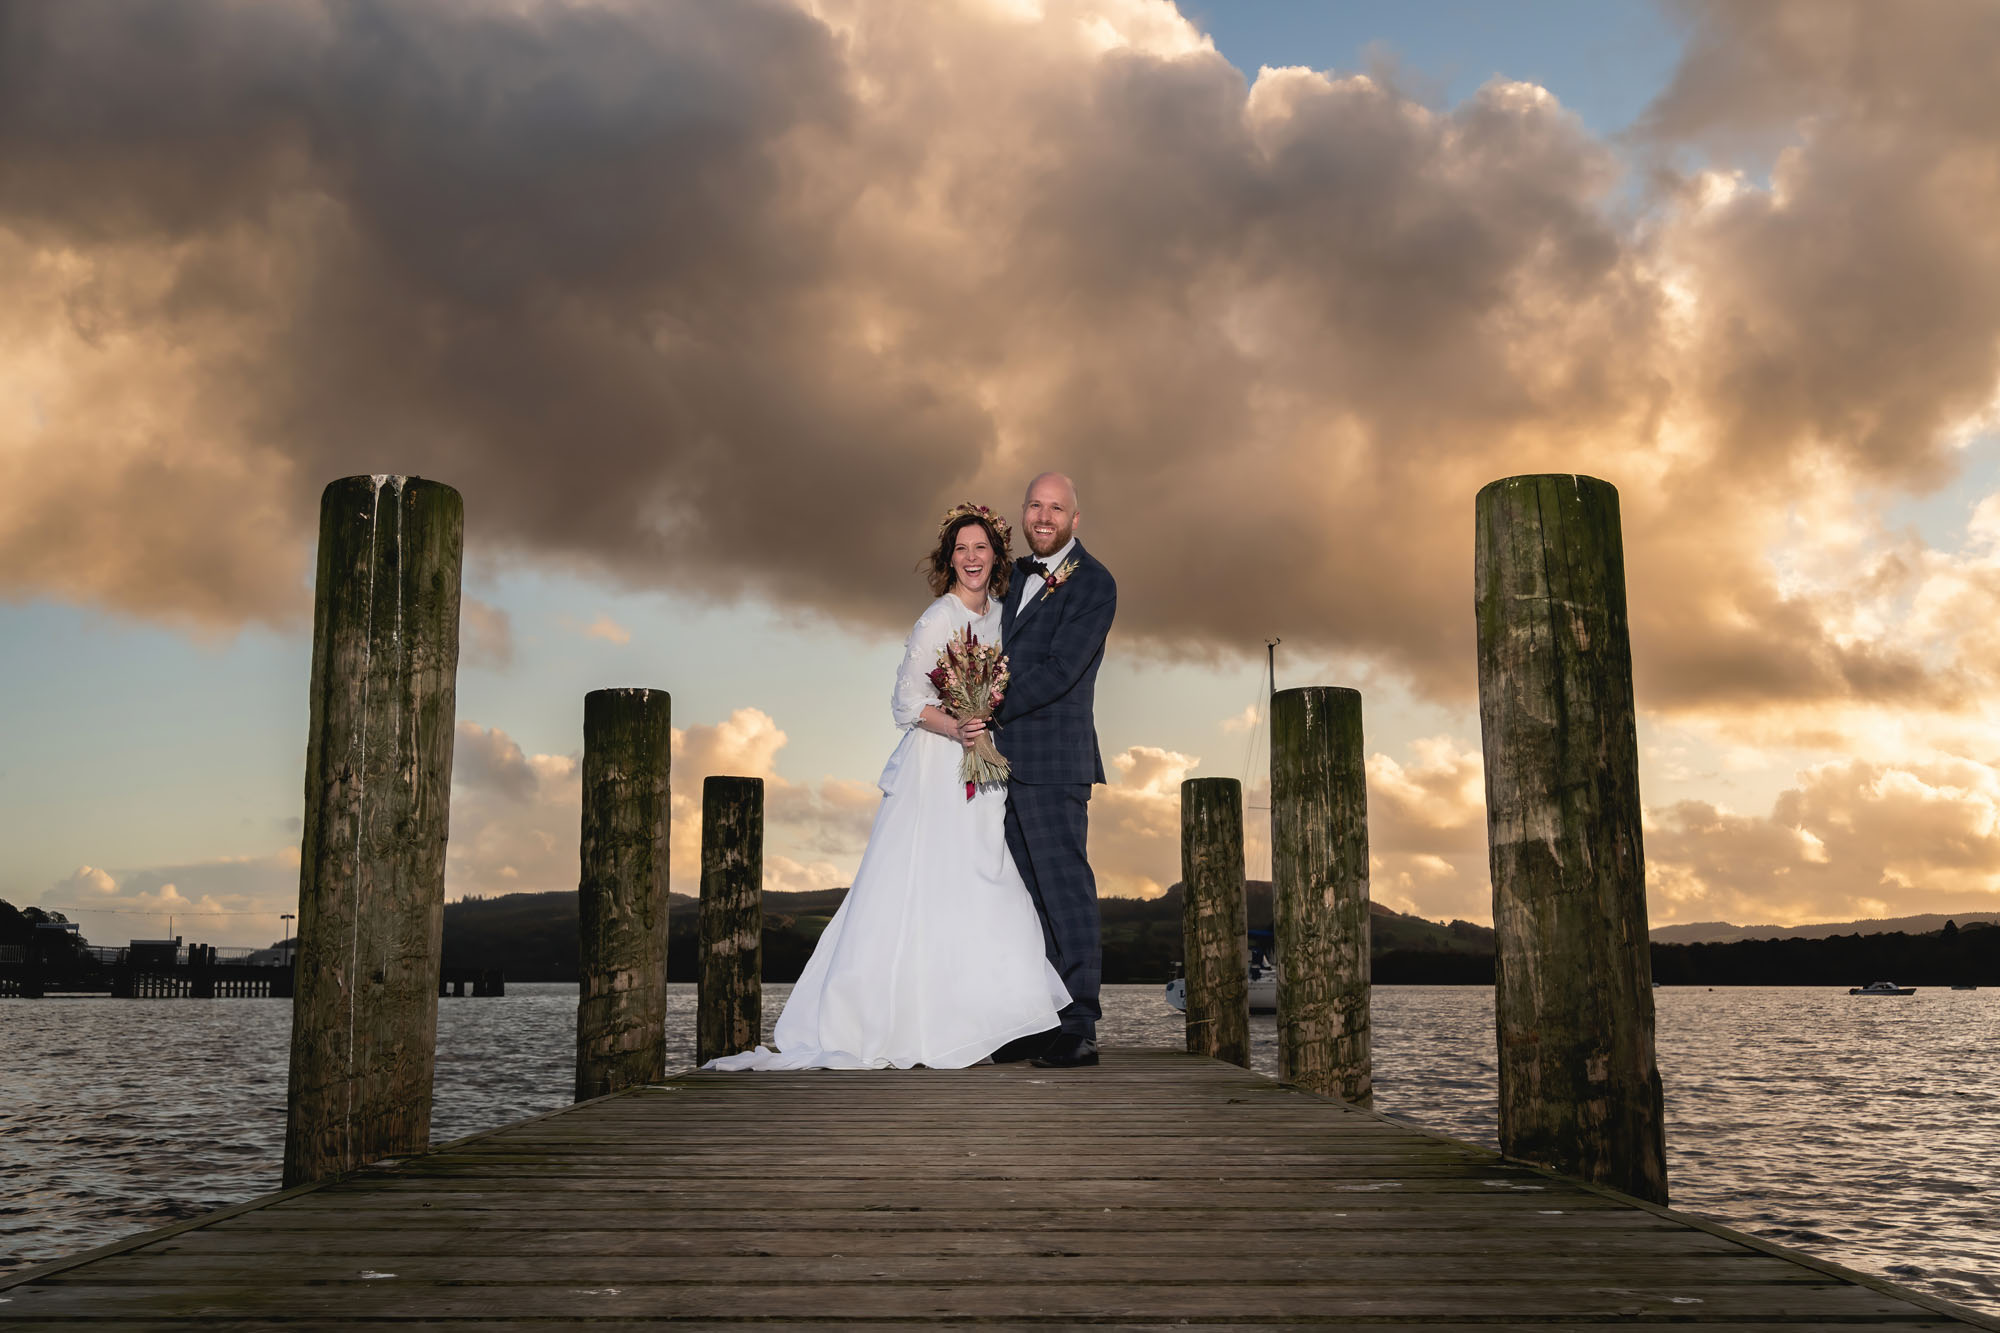 A couple stand on a jetty at sunset. She's wearing a white wedding dress and holding a bouquet. He's in a dark suit.